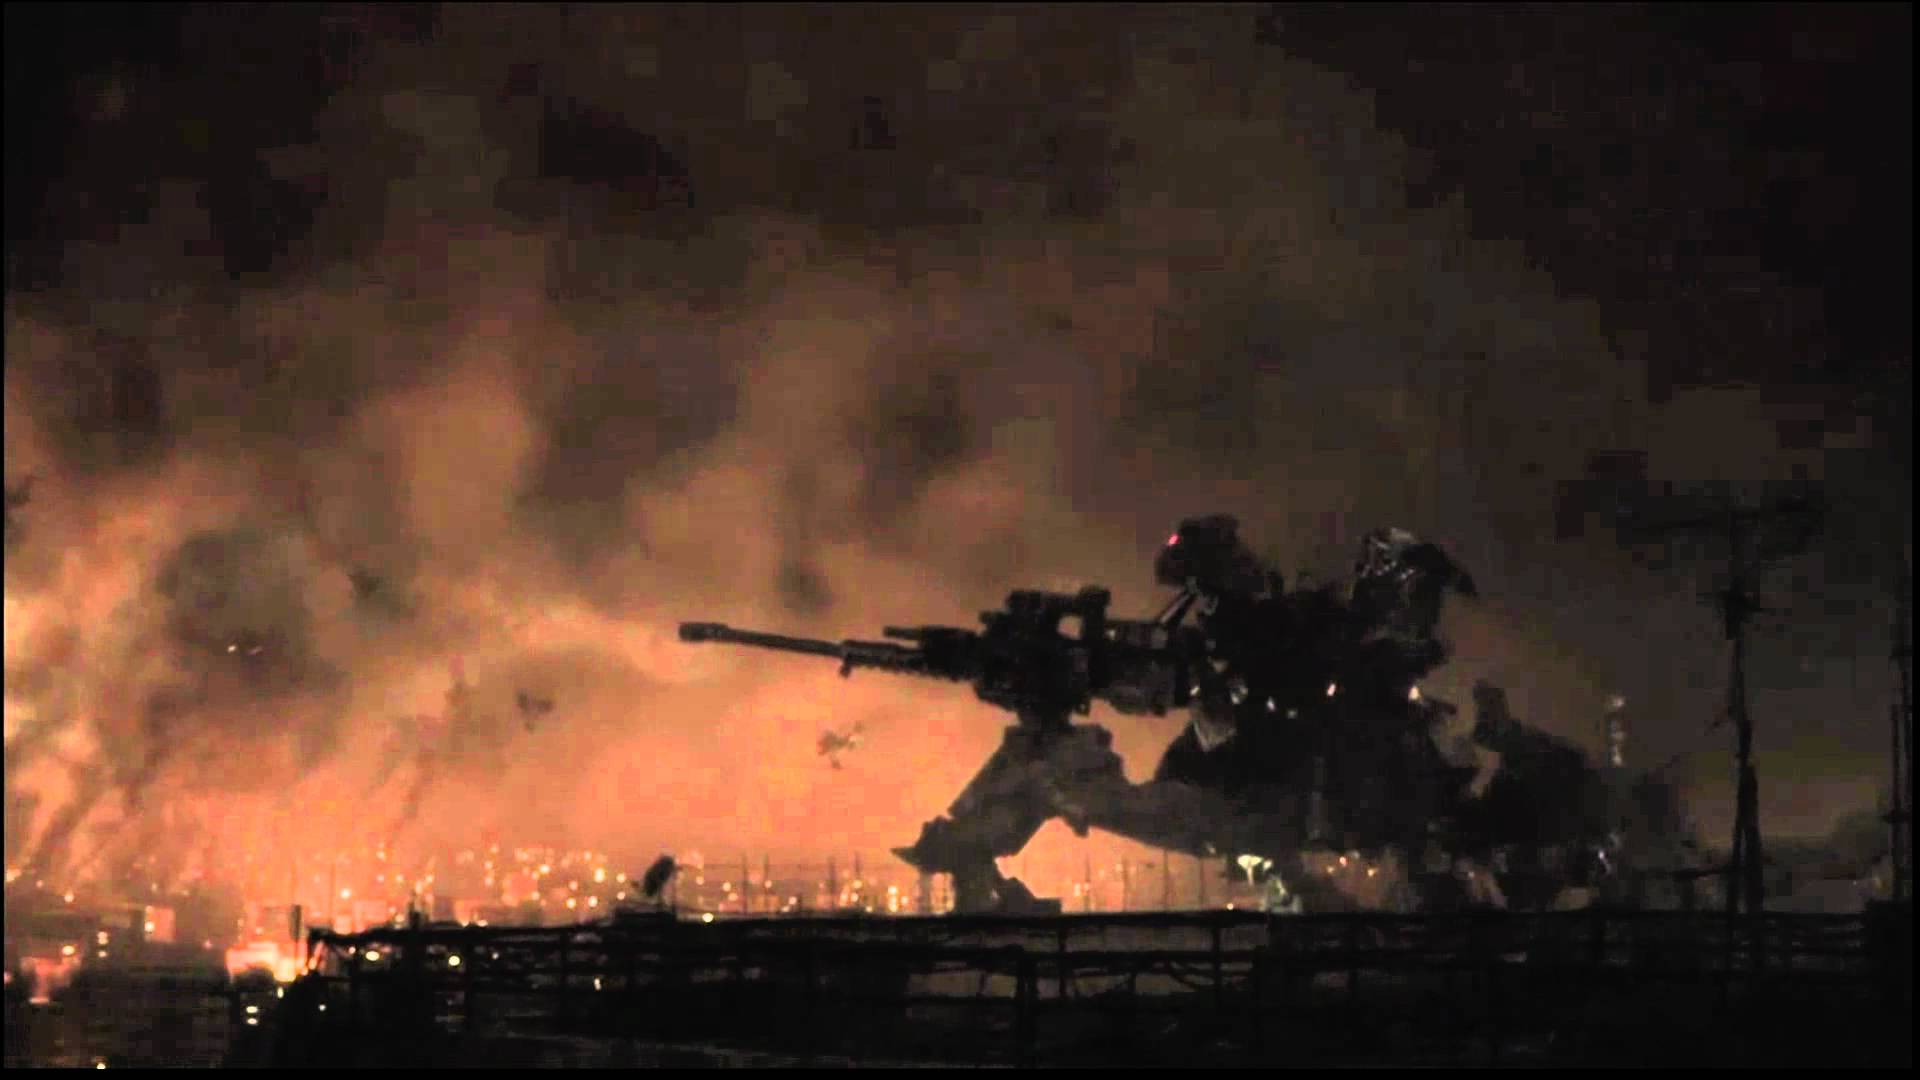 ARMORED CORE 5 CG trailler full version - YouTube